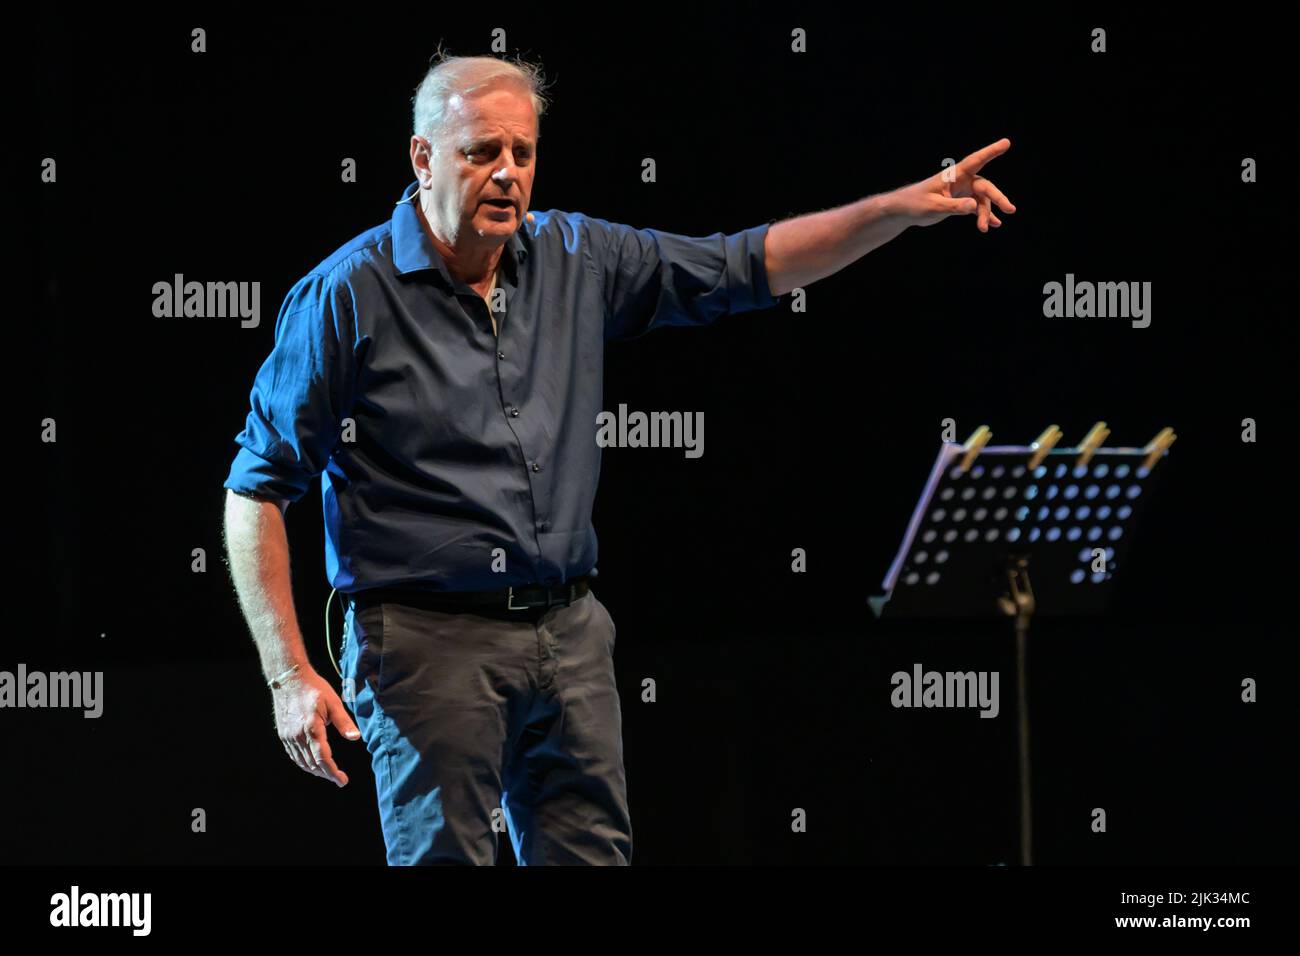 Camaiore, Italy. 29 July, 2022. Enrico Bertolino performs with his show on the stage of the Giorgio Gaber Festival in front of the Camaiore audience. Stefano Dalle Luche / Alamy Live News. Stock Photo